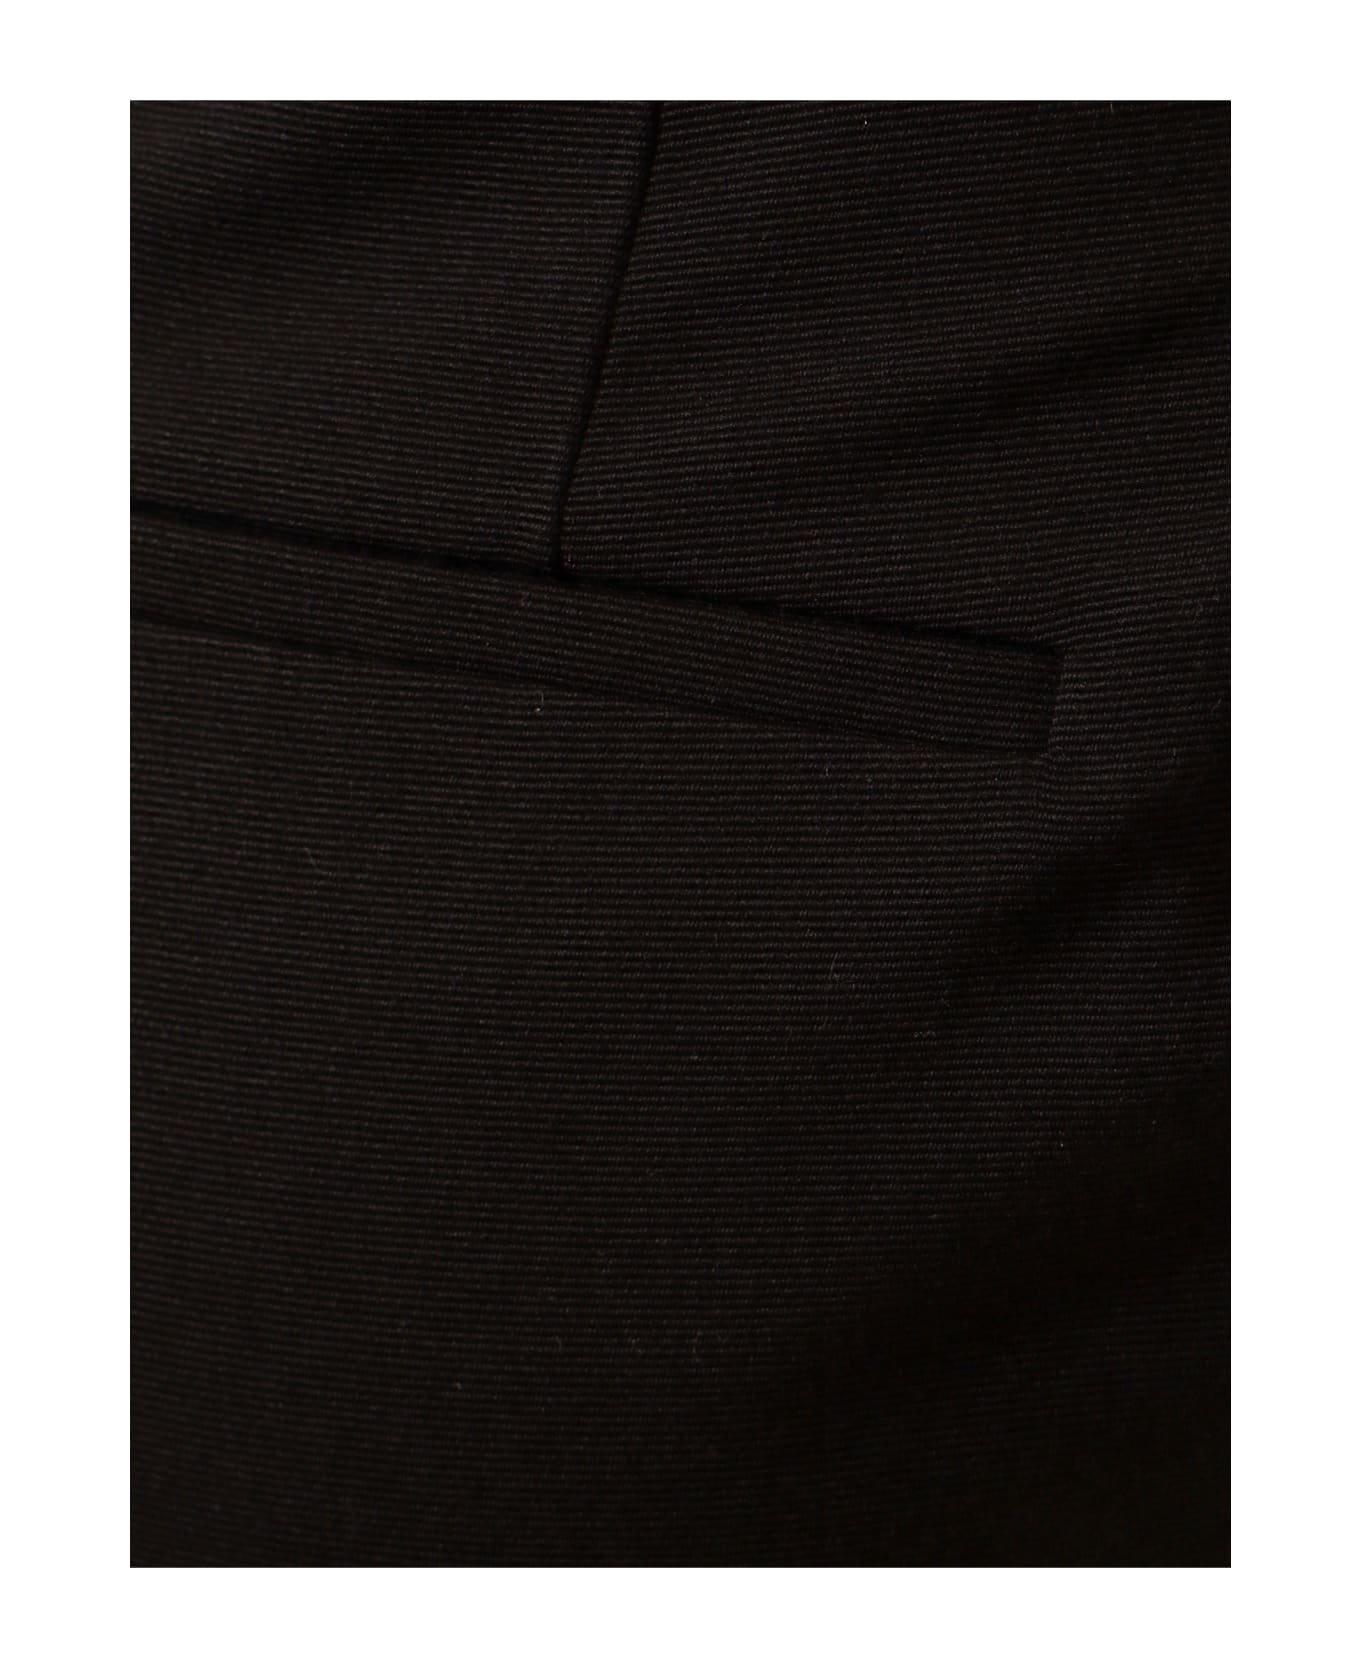 Saint Laurent Concealed Trousers - Black ボトムス